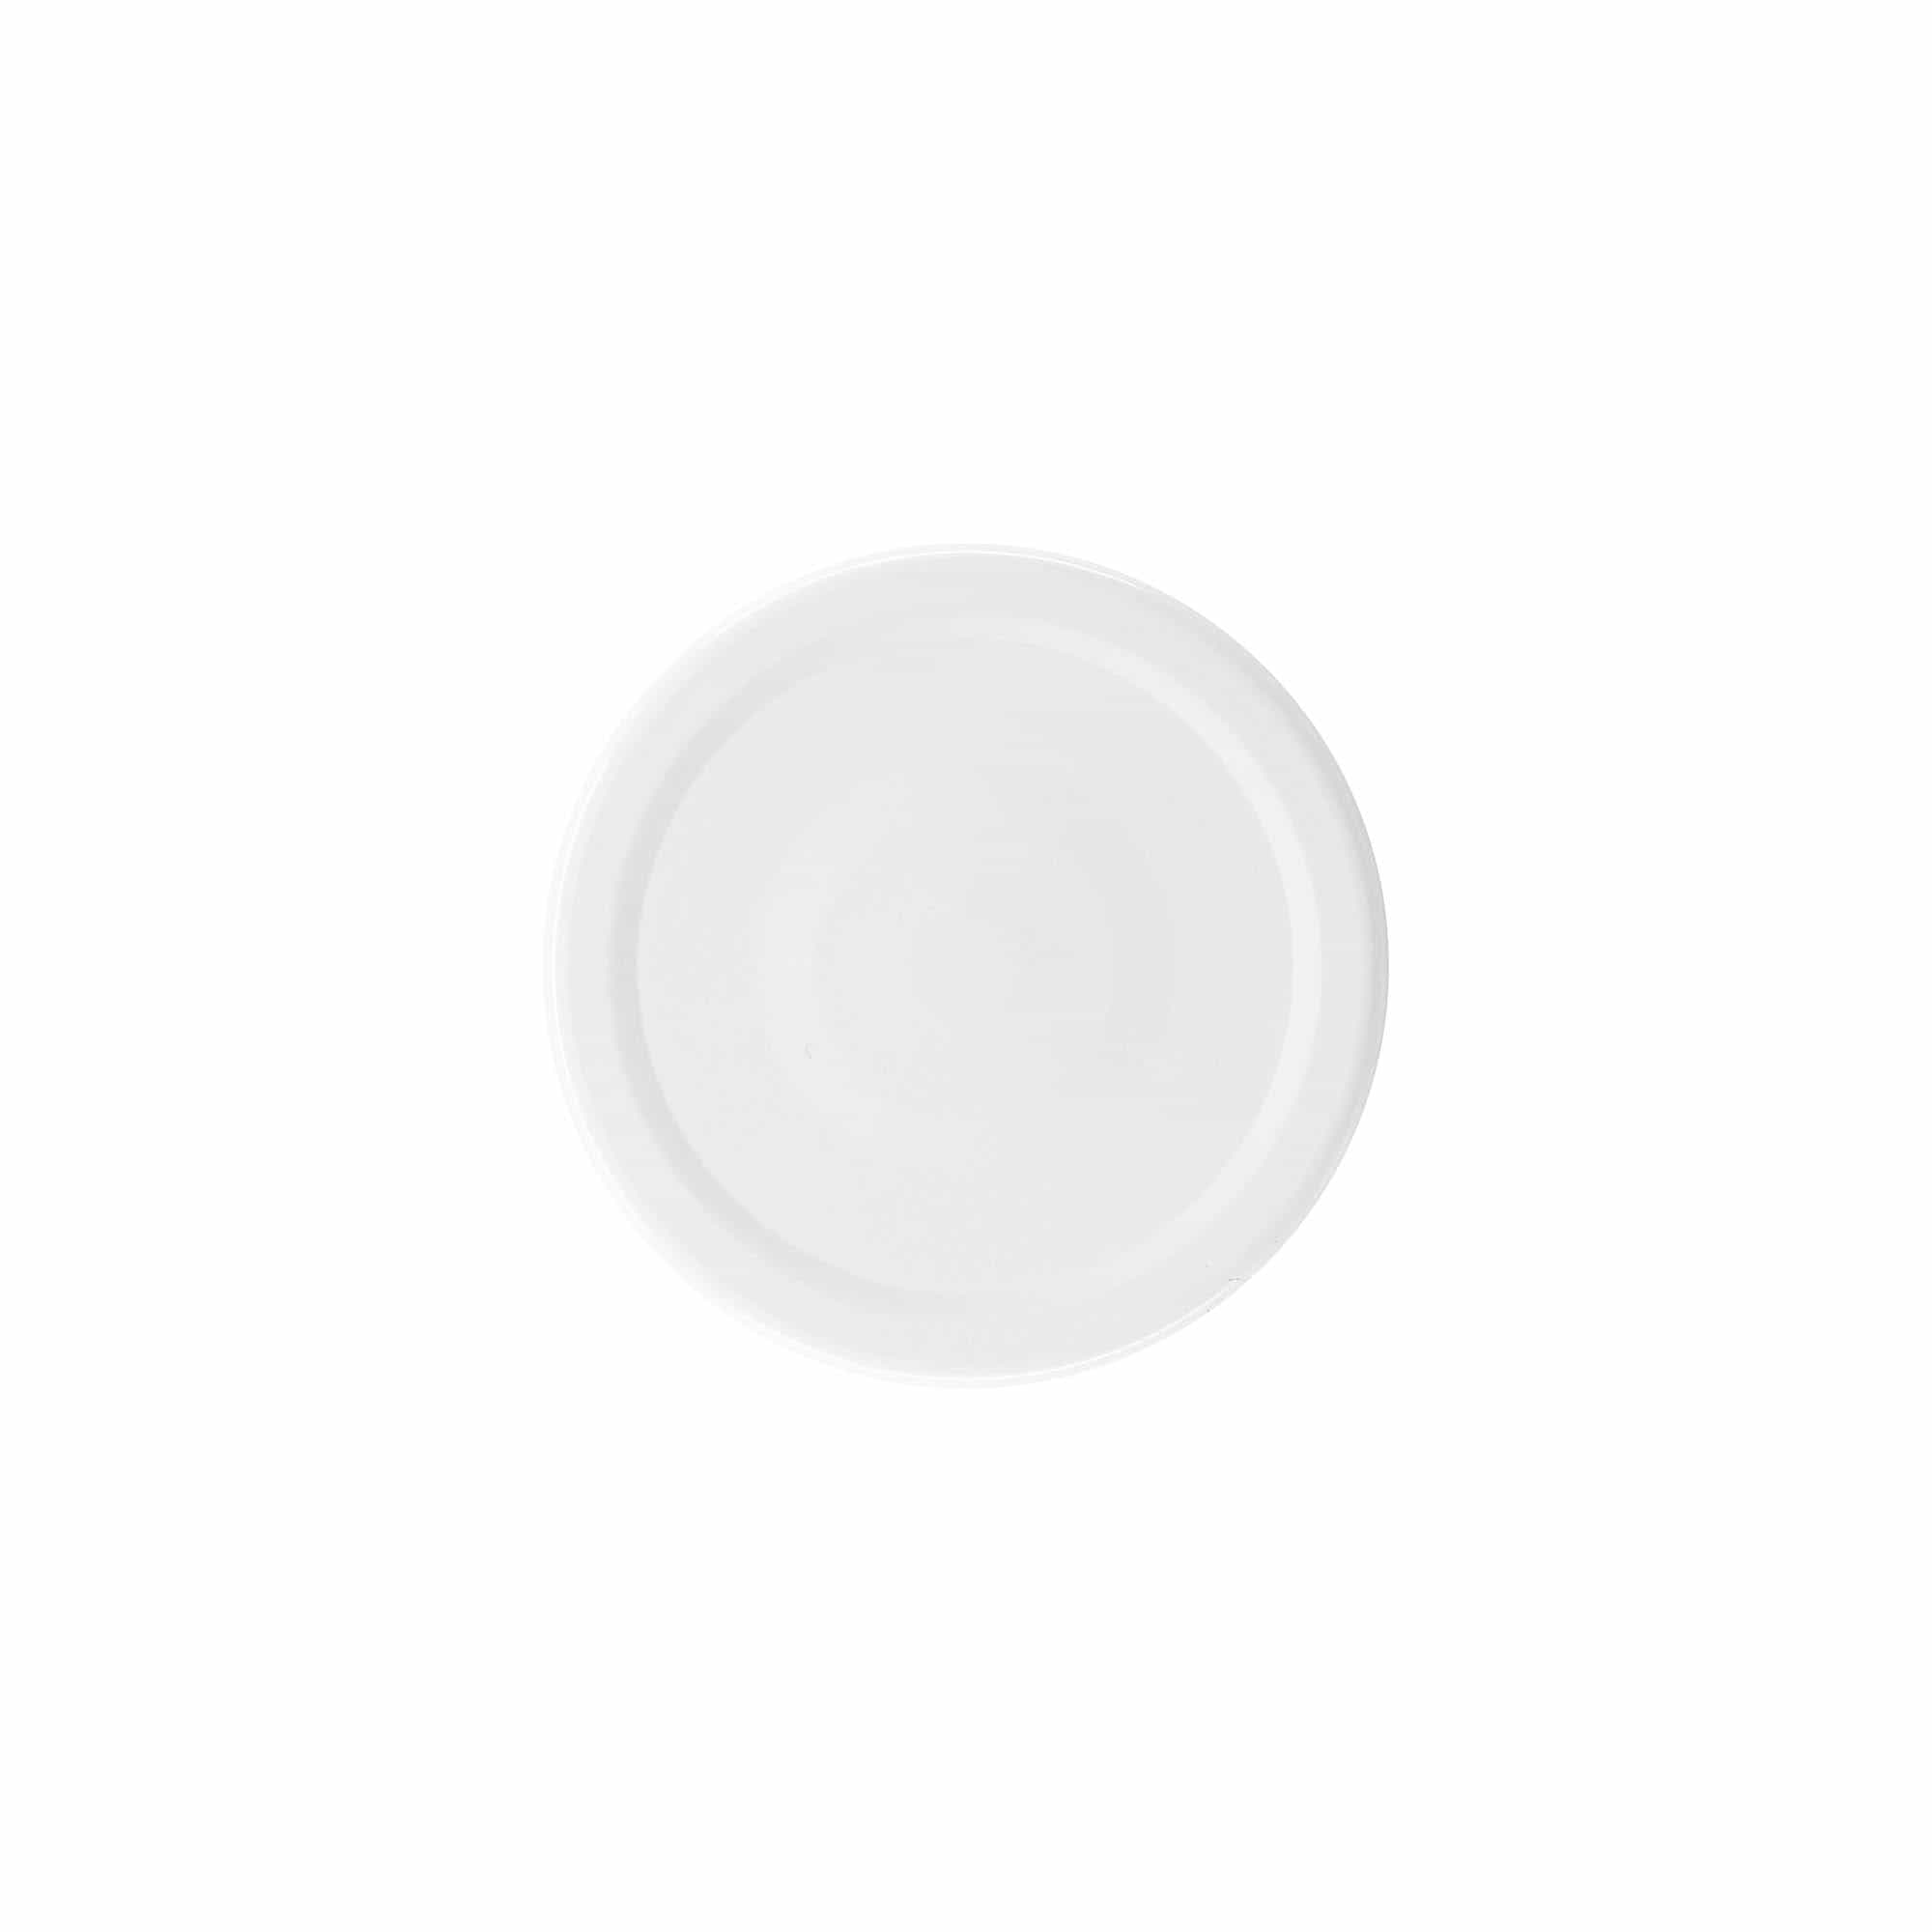 Deep twist off lid, tinplate, white, for opening: Deep-TO 66